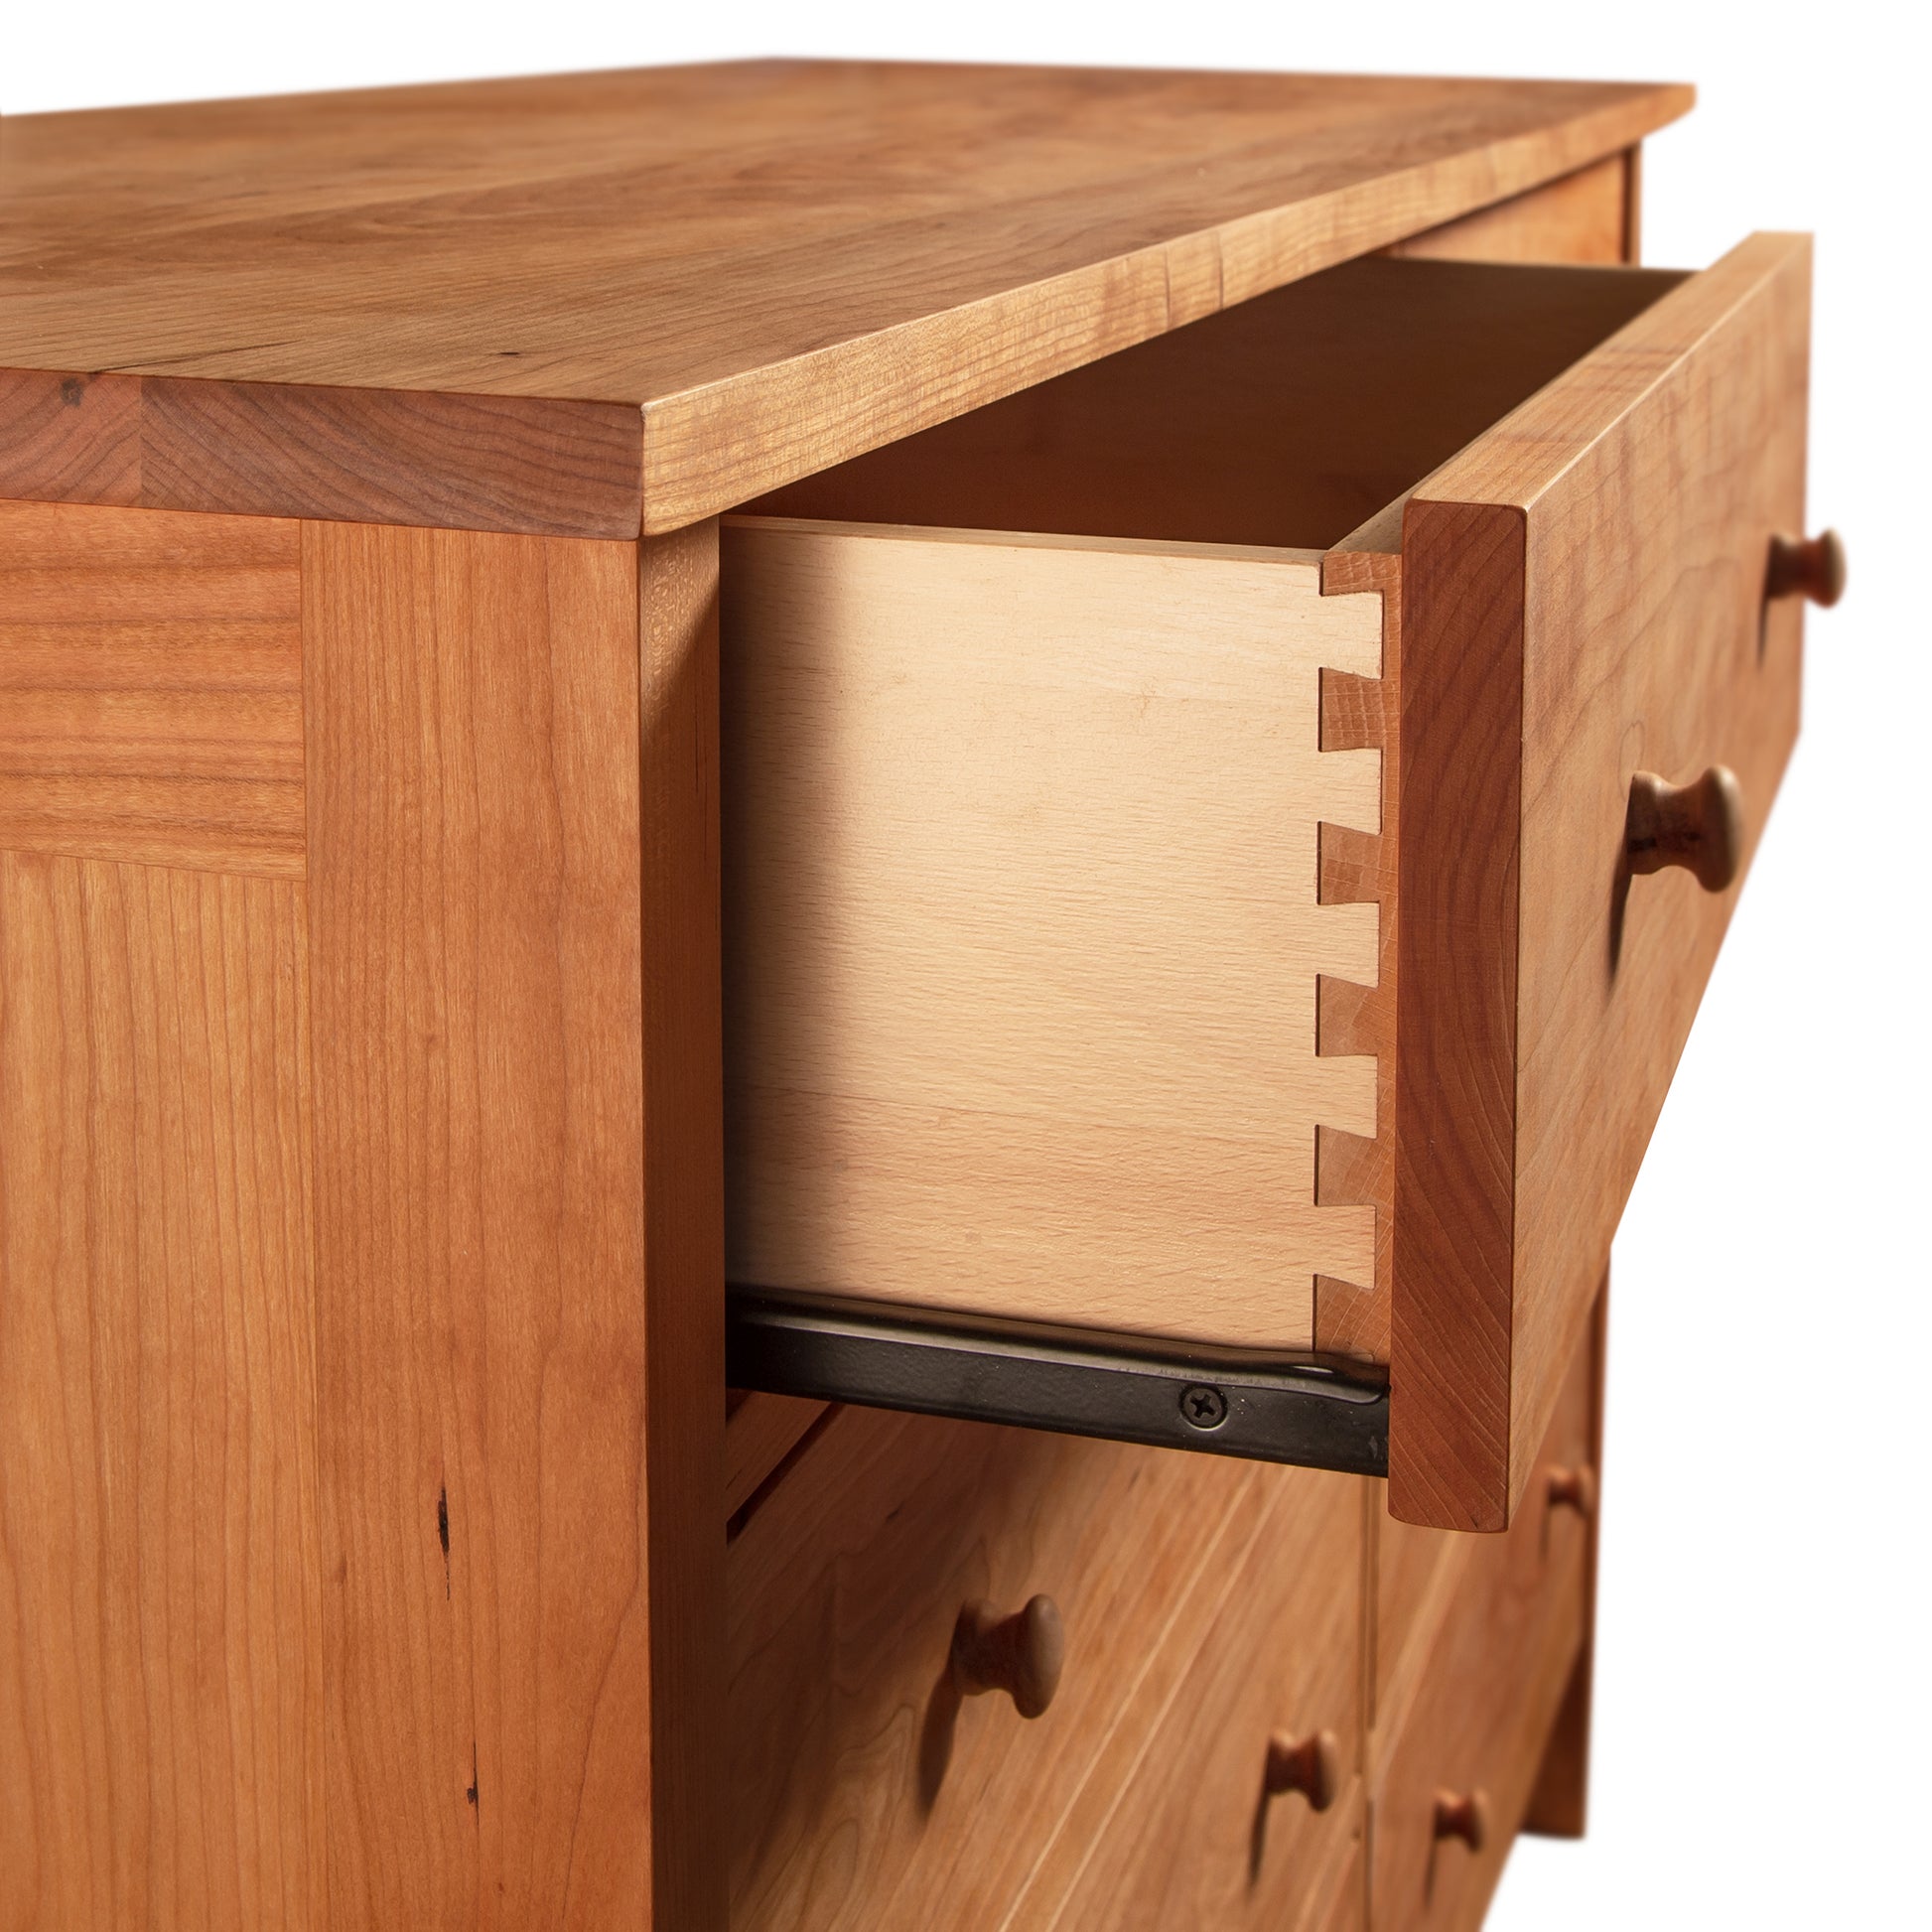 A Burlington Shaker 8-Drawer Dresser #1 by Vermont Furniture Designs, inspired image of a Shaker-style wooden dresser with drawers.